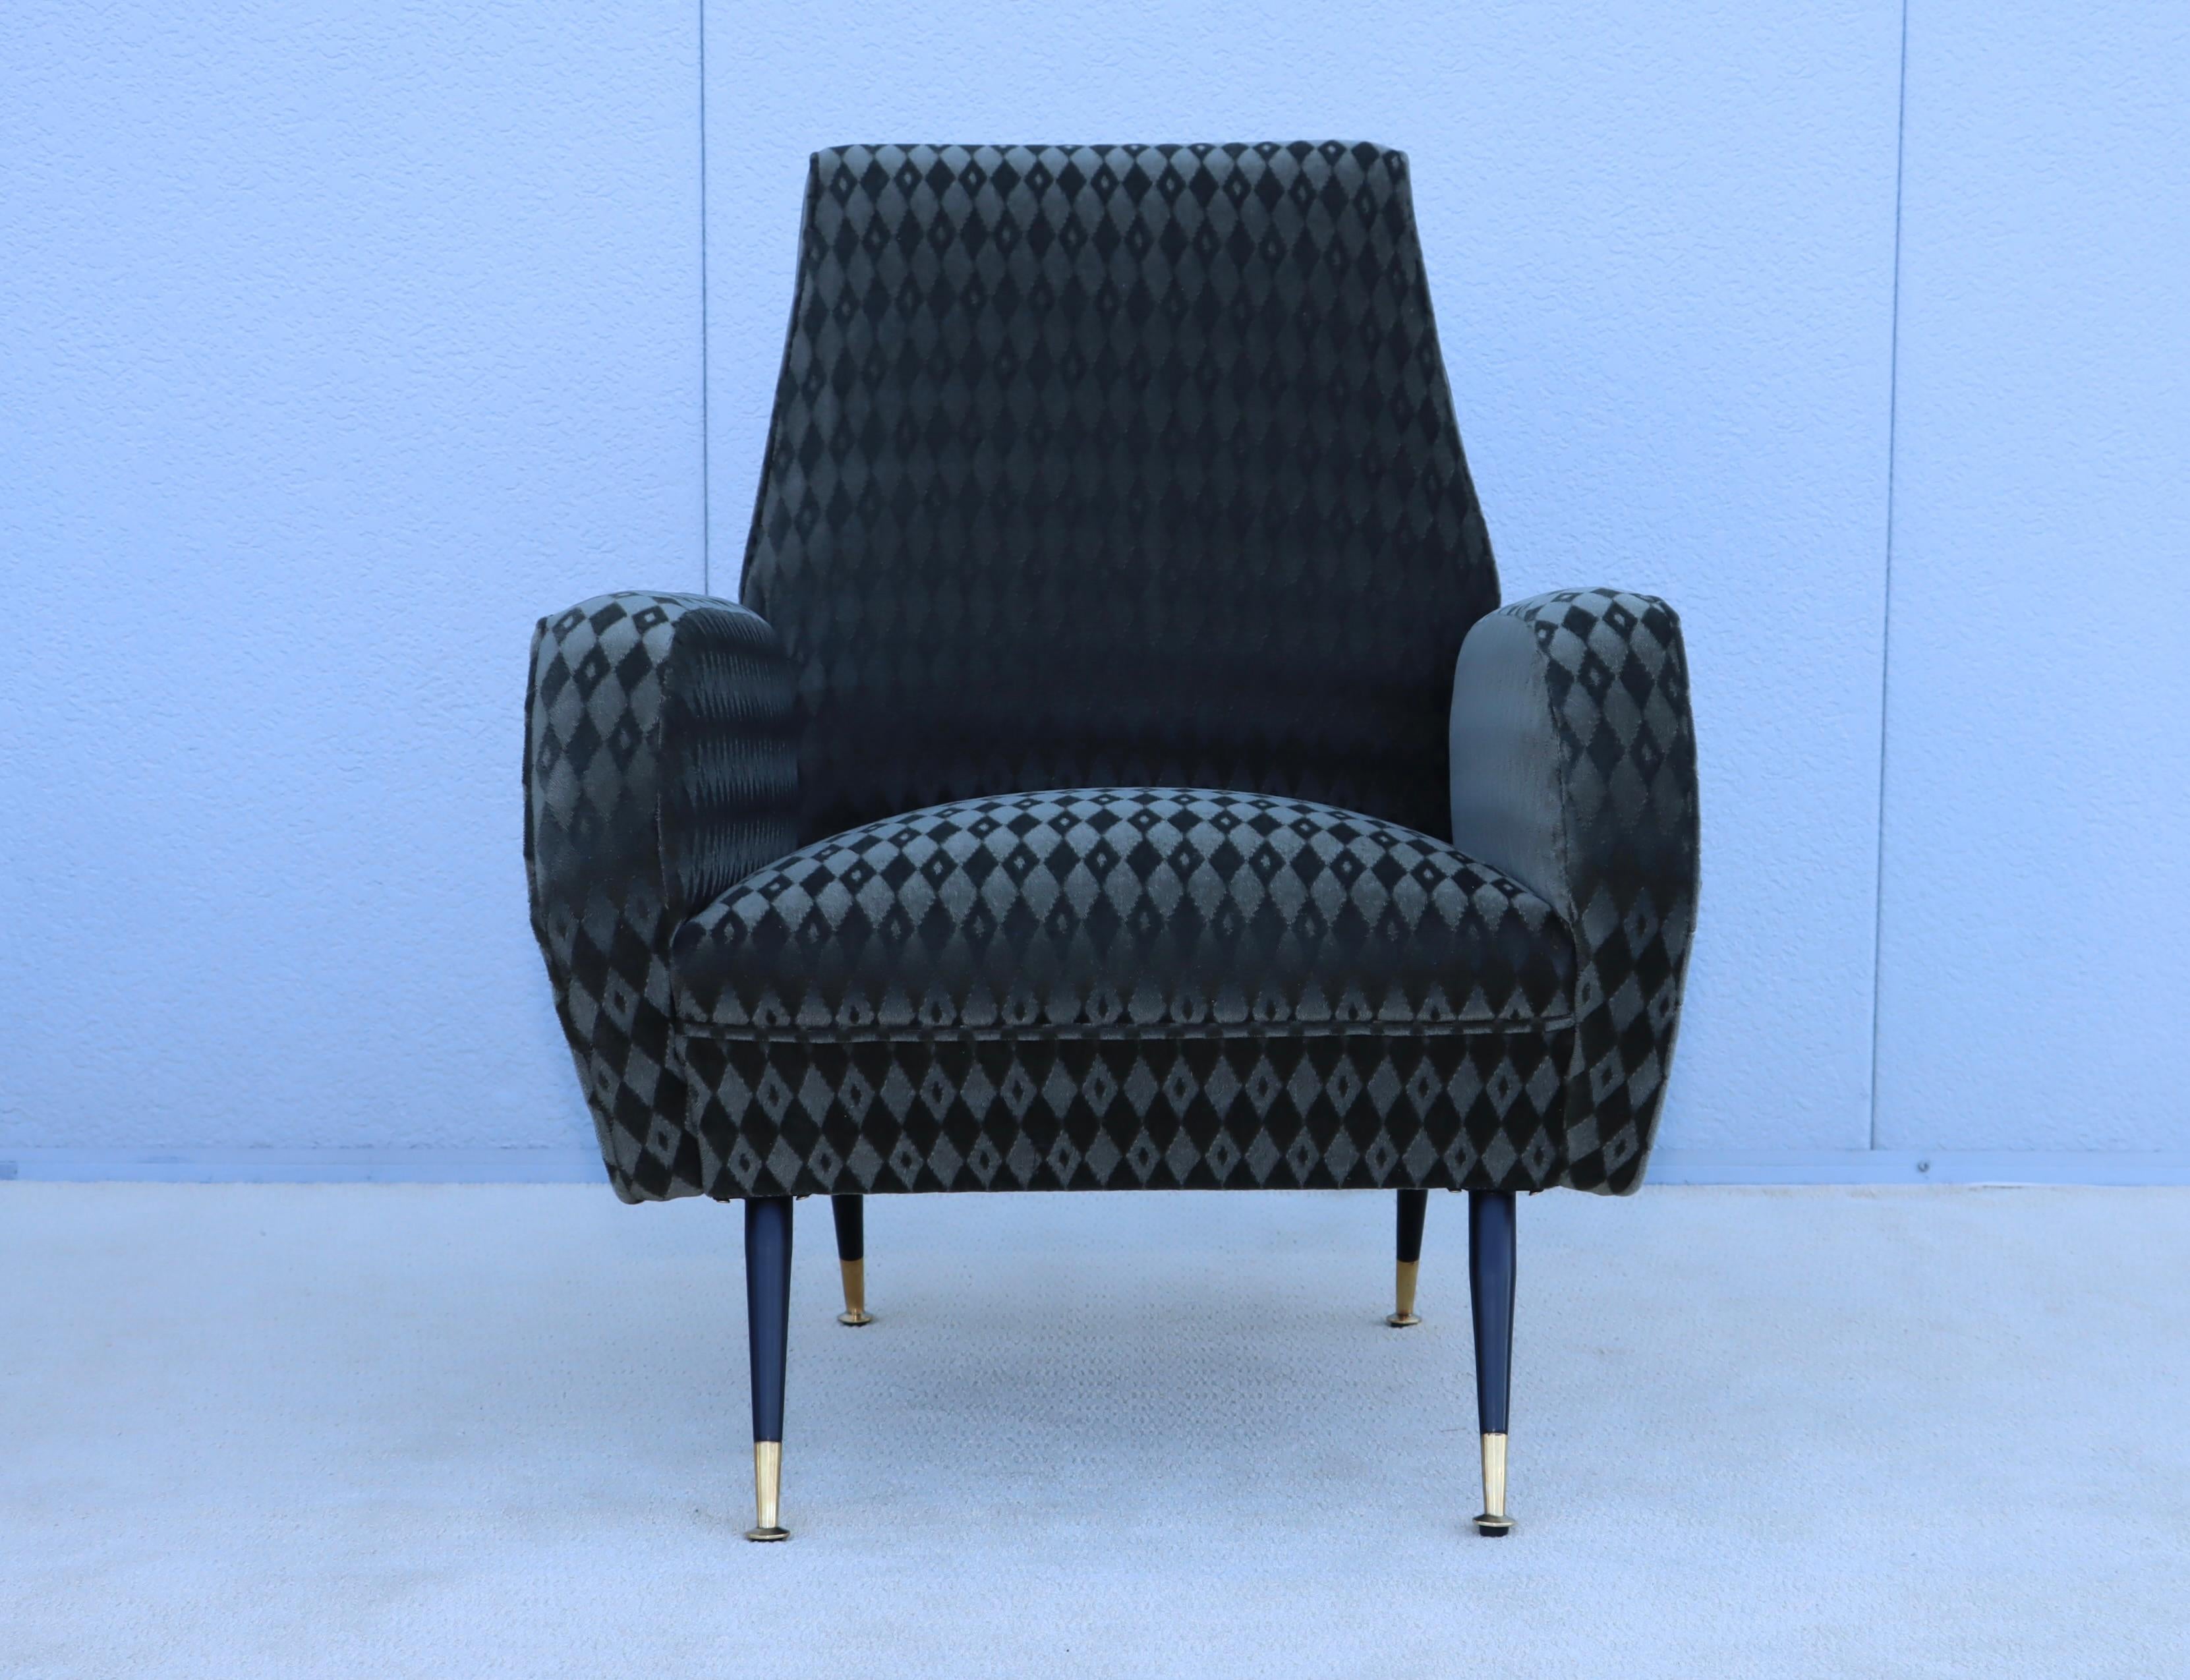 1950's Mid-Century Modern Italian Lounge Chairs With Donghia Mohair Upholstery For Sale 6